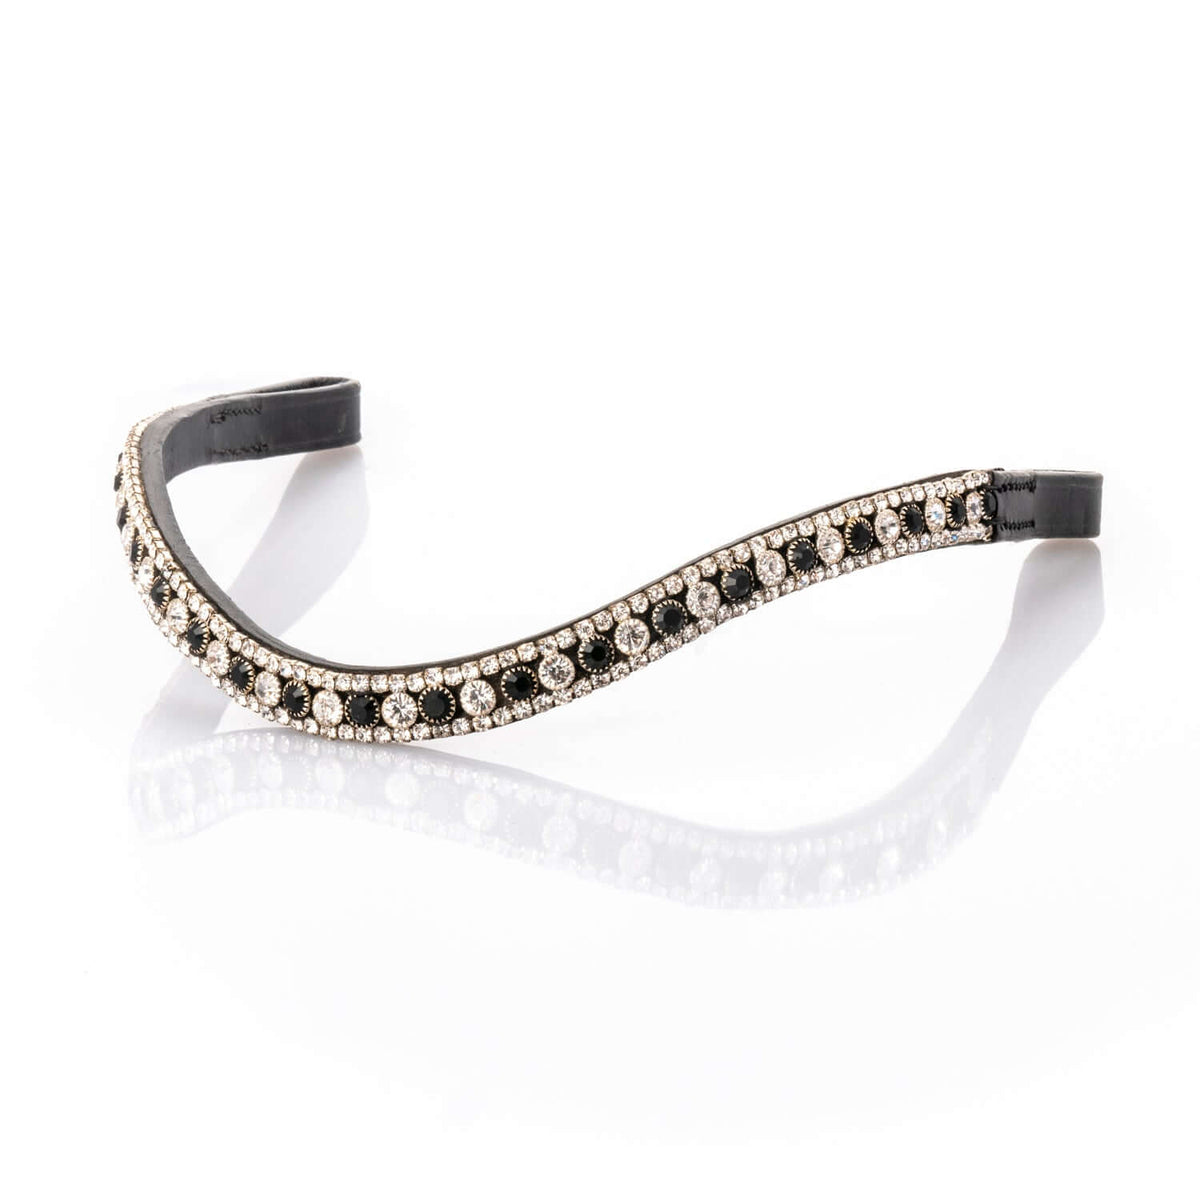 Details about   New 5 row curvy clear and black Crystal leather Brow band Black and brown sale 